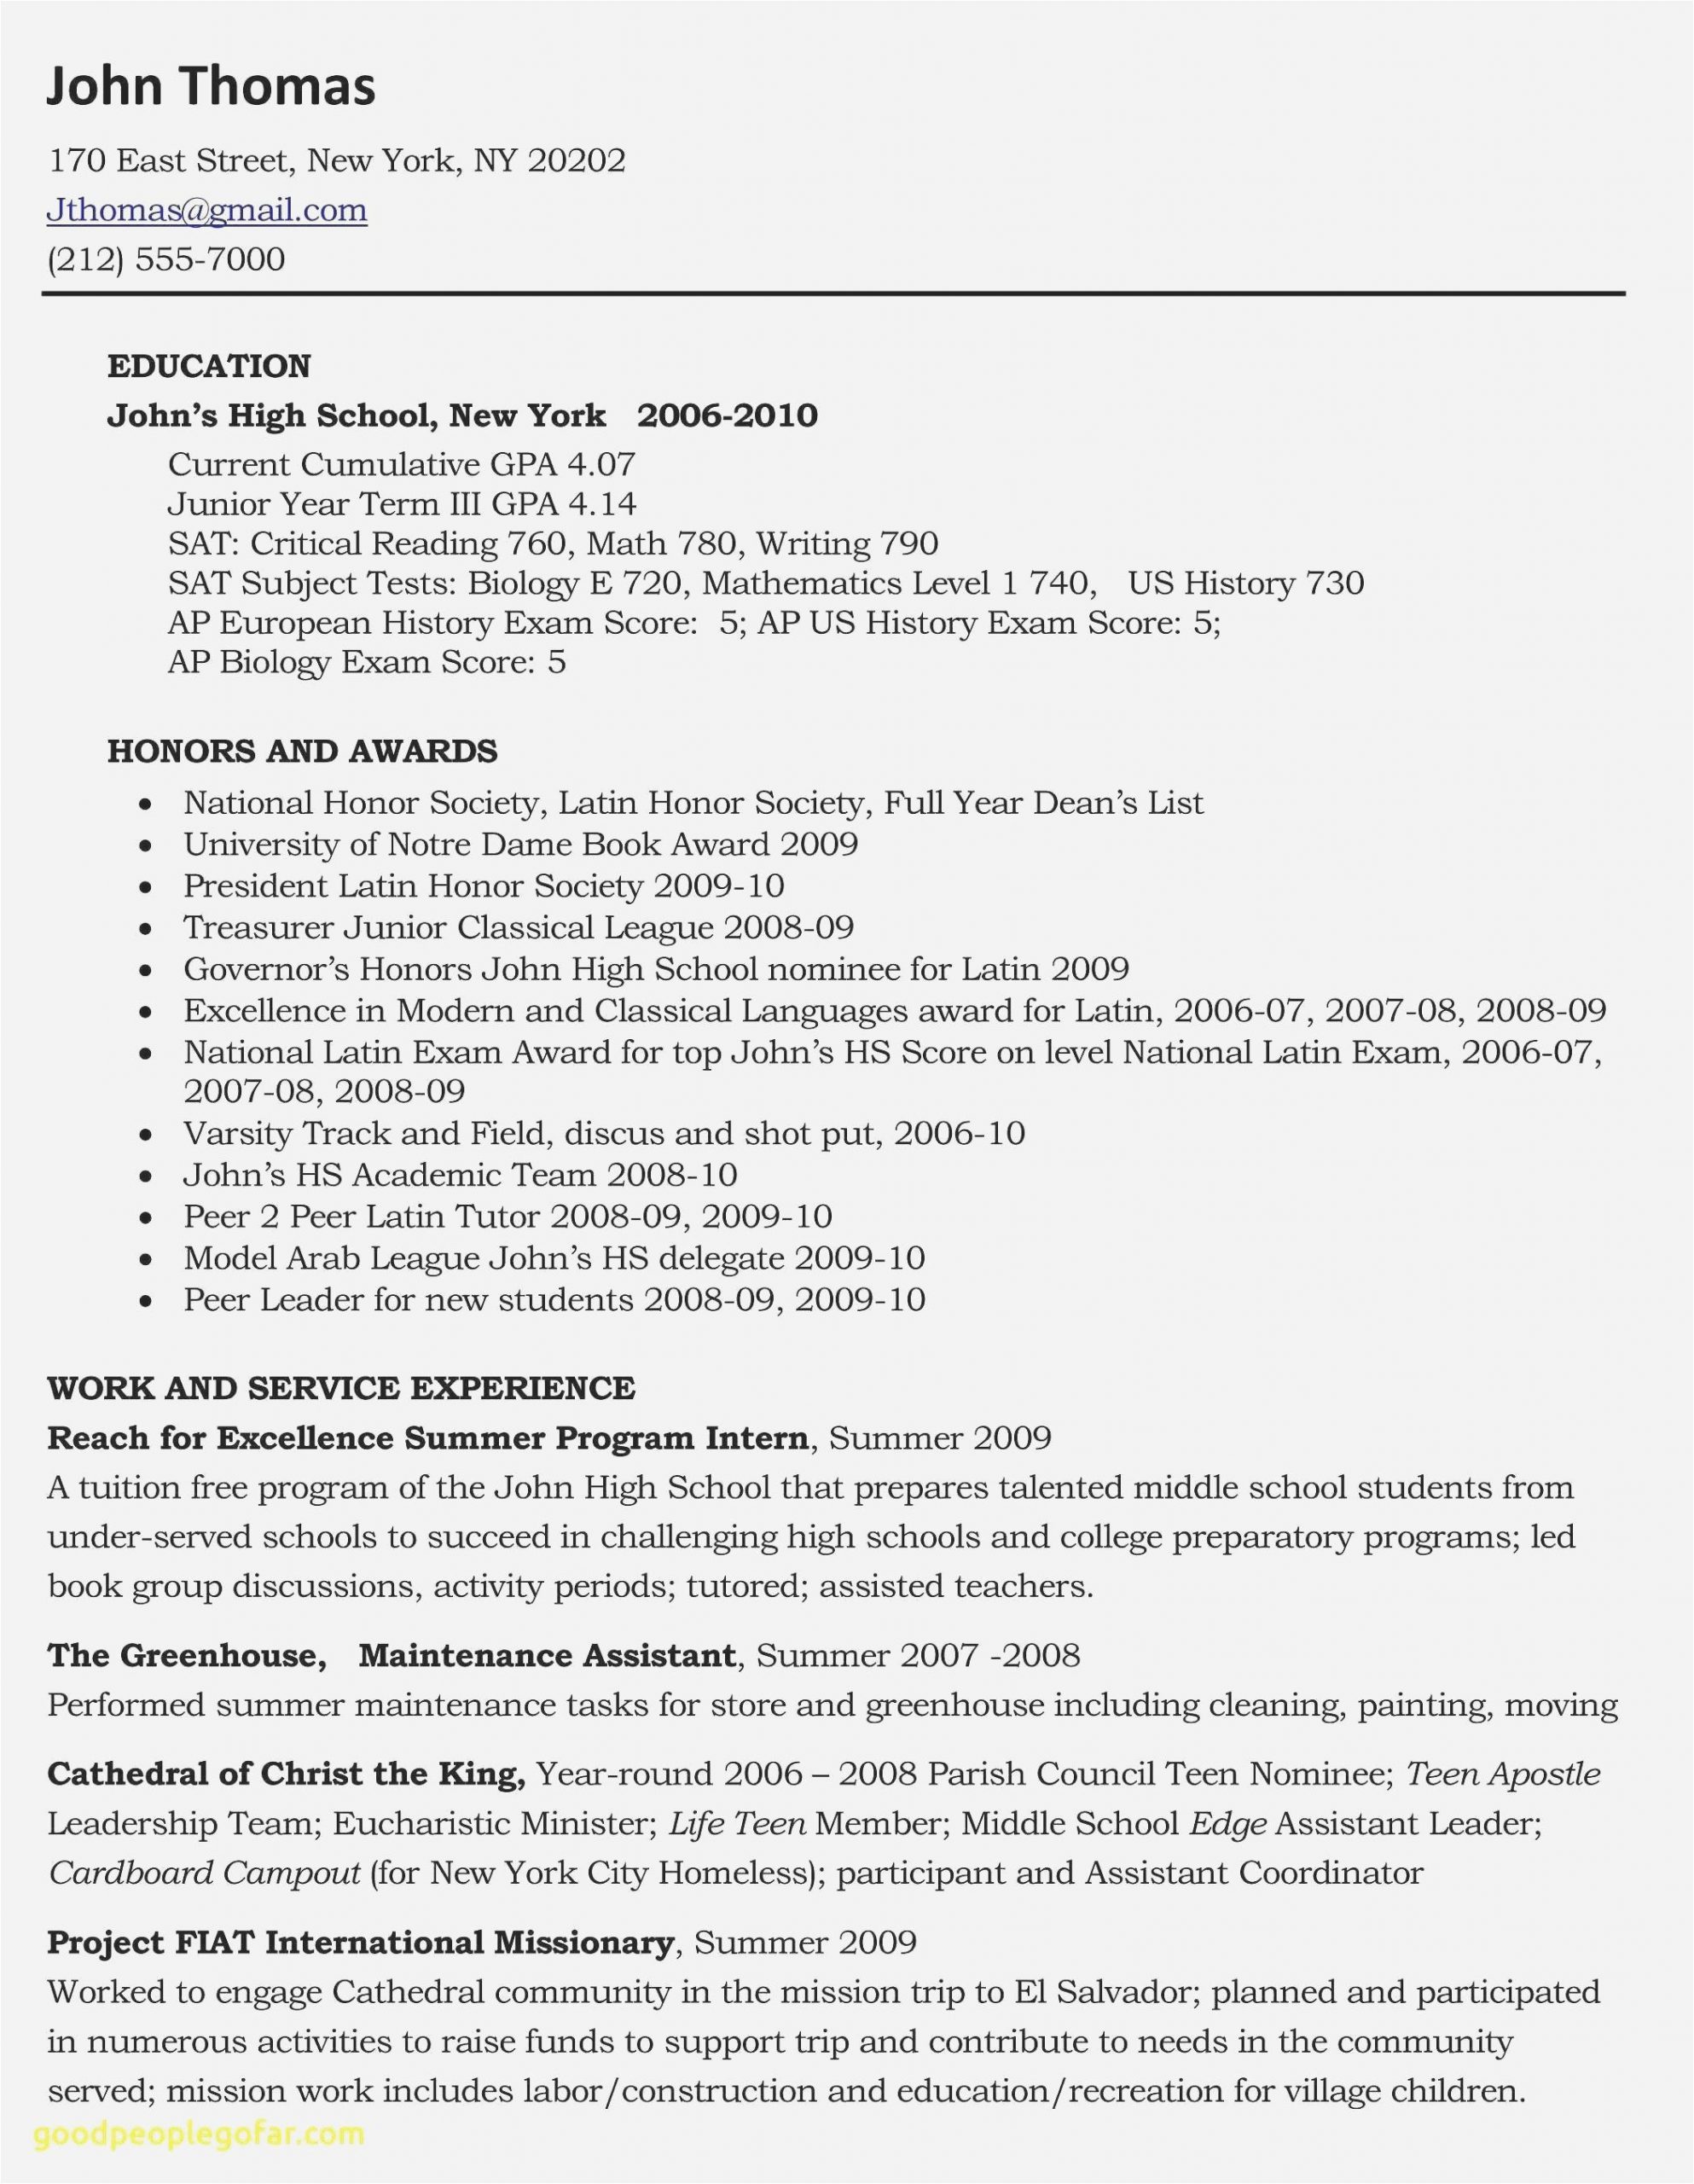 Sample Resume for Community College Teaching Position Sample Resume for Munity College Teaching Position